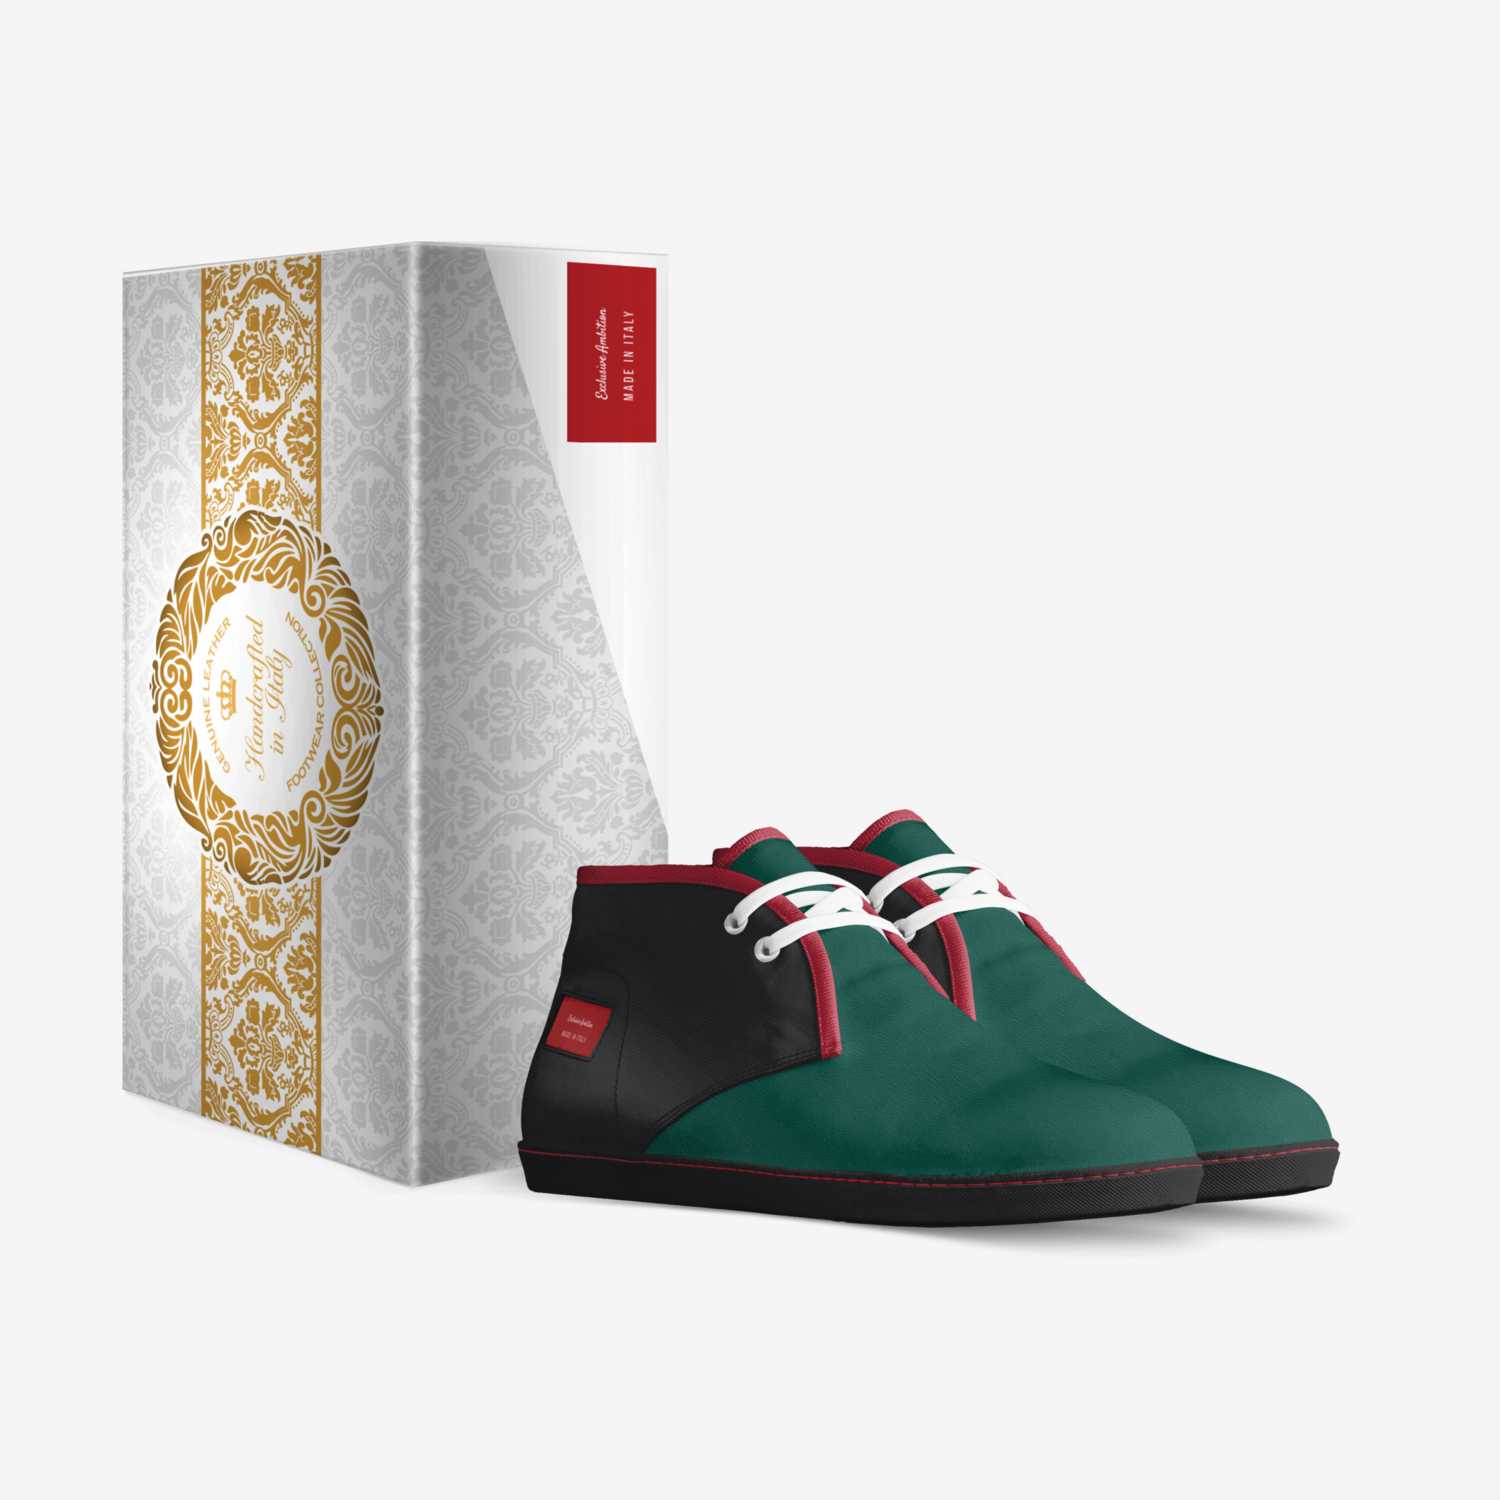 Exclusive Ambition custom made in Italy shoes by Henry | Box view